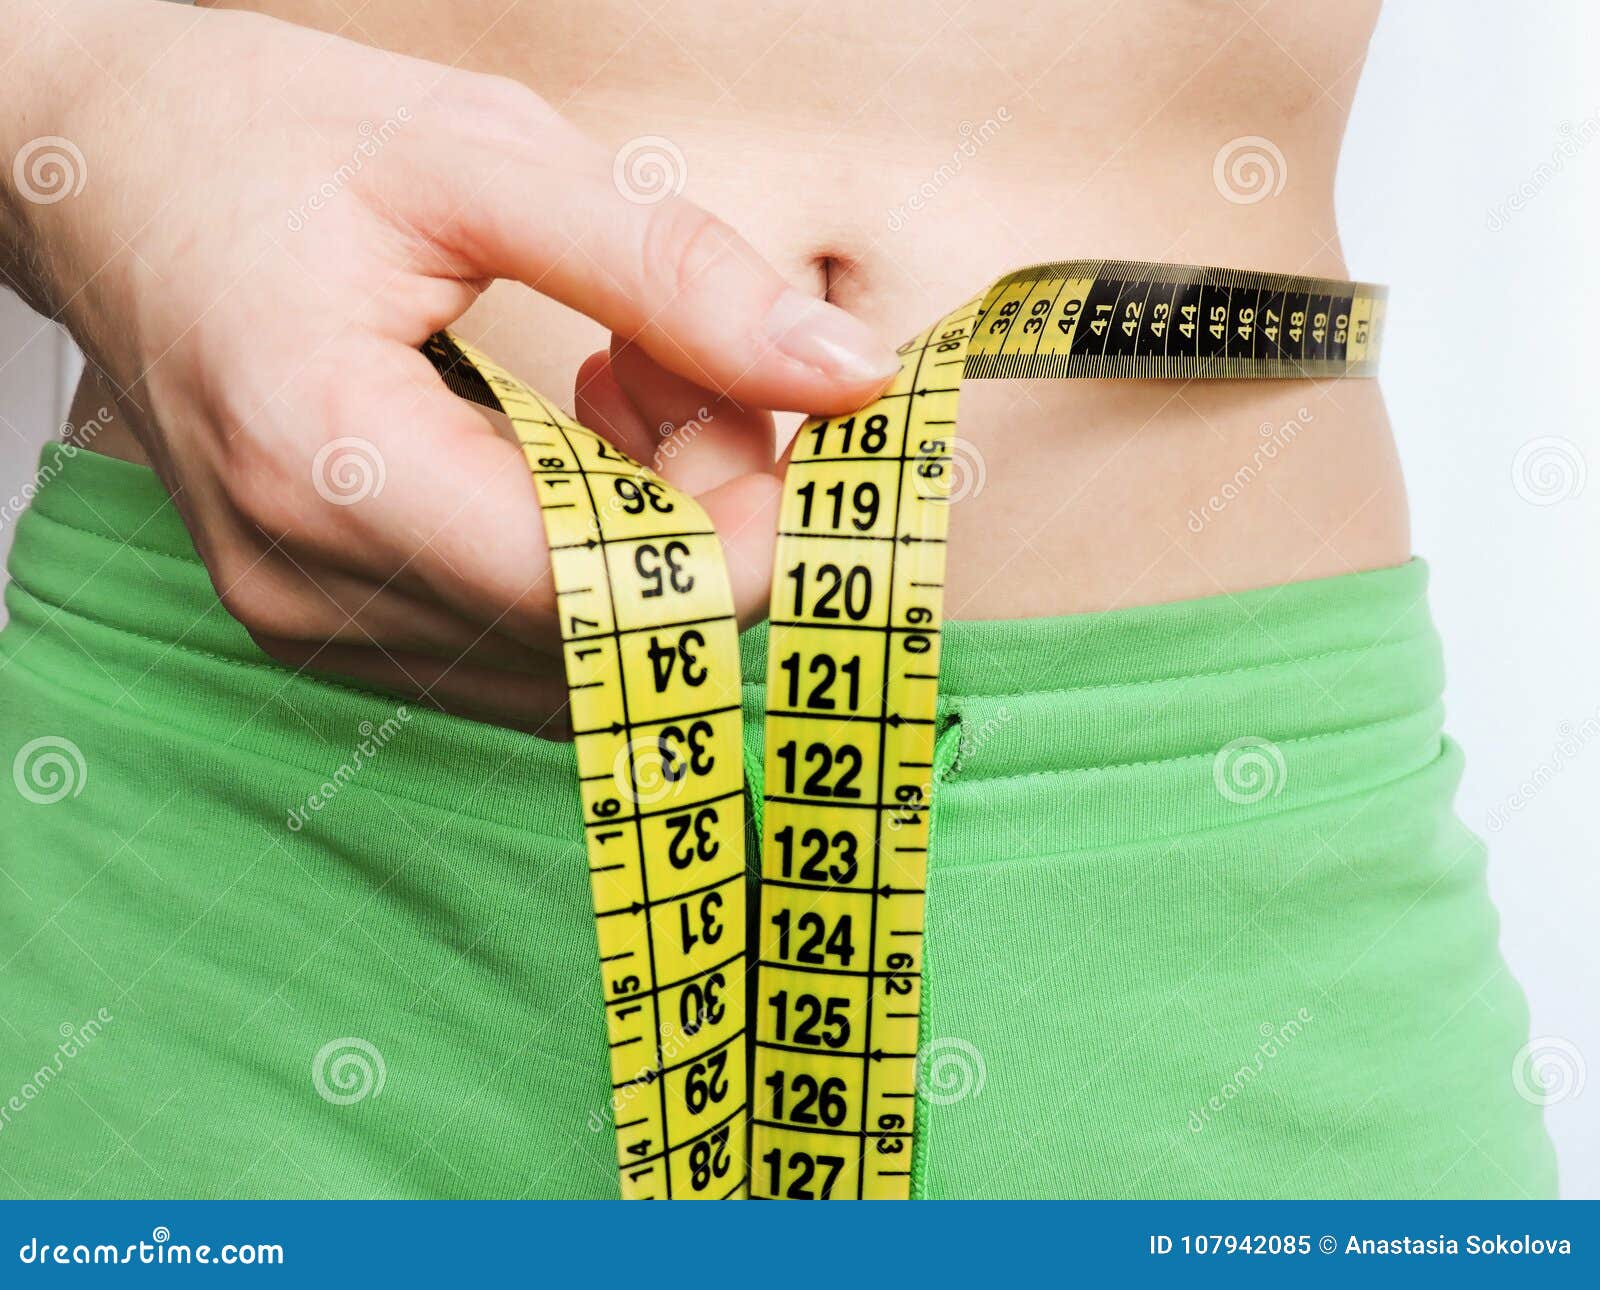 https://thumbs.dreamstime.com/z/excess-belly-fat-measurements-waist-fitness-girl-green-sports-clothing-measuring-her-yellow-tape-workout-107942085.jpg